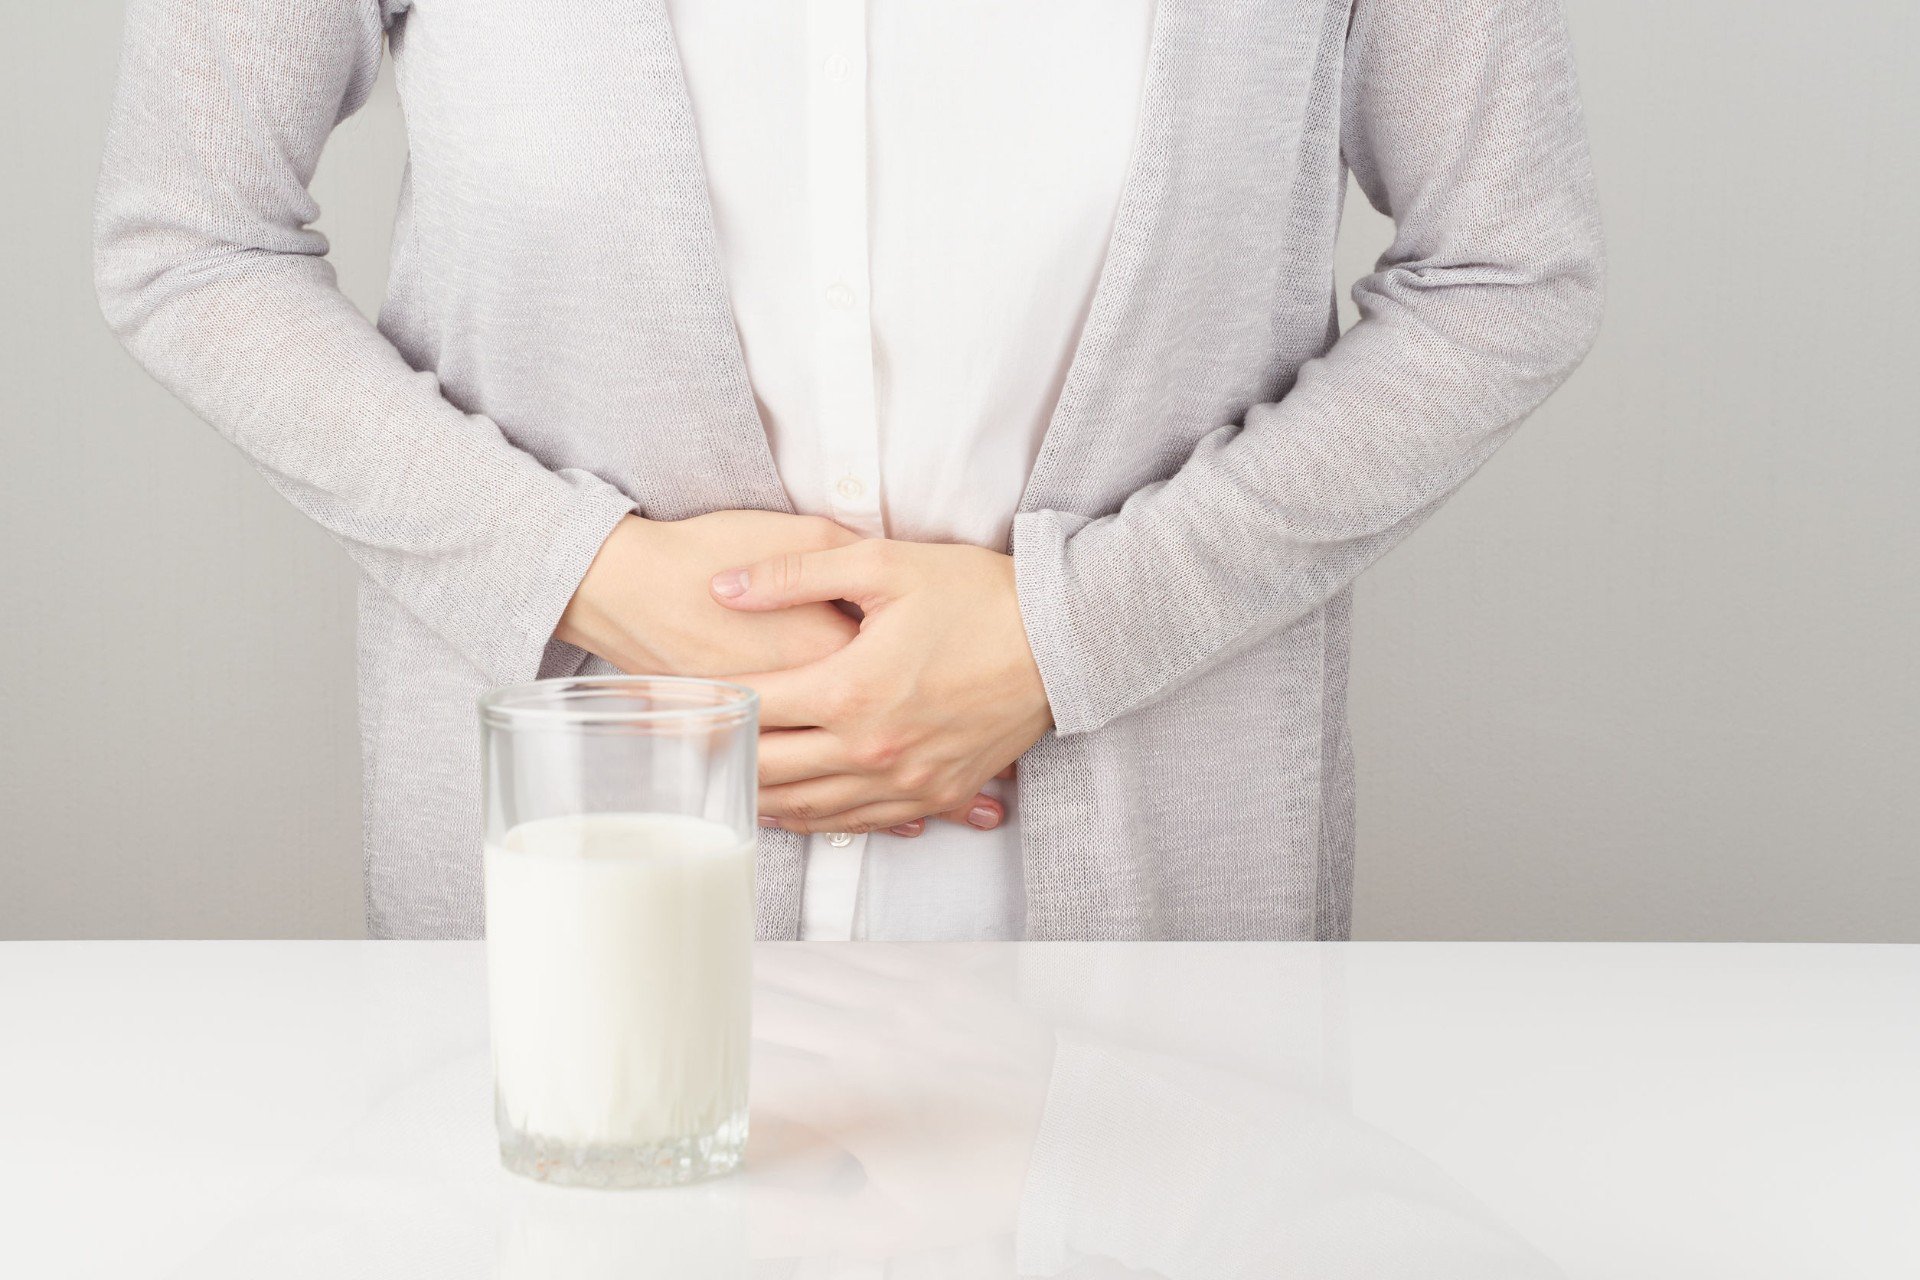 Everything You Want To Know About IBS